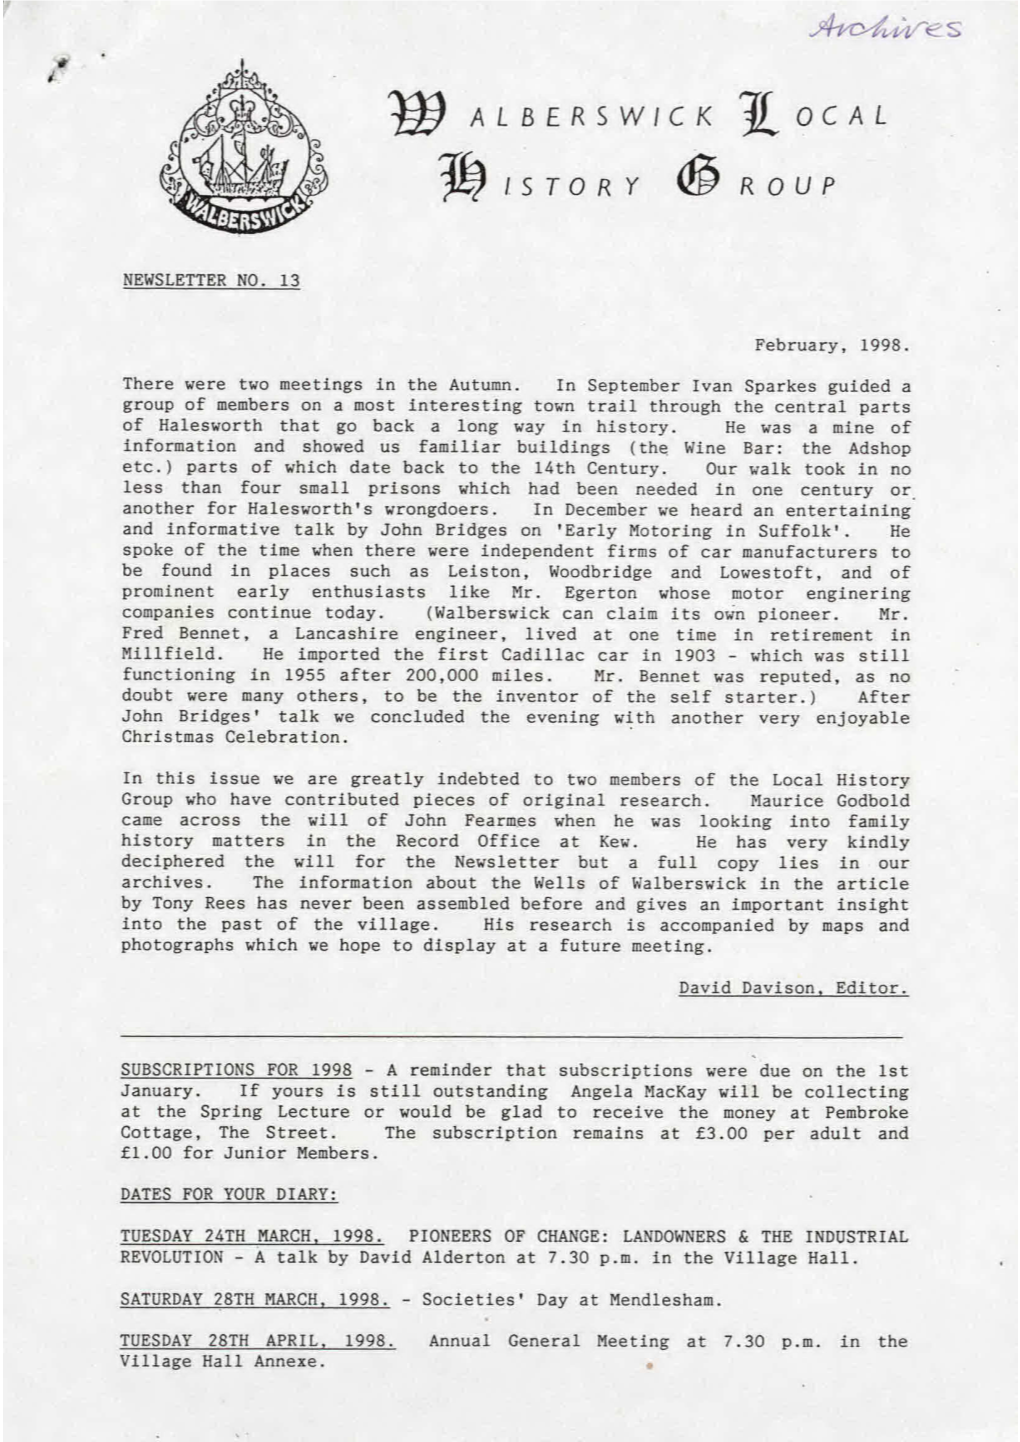 GENERAL & INFO HISTORY GROUP NEWSLETTERS Copy